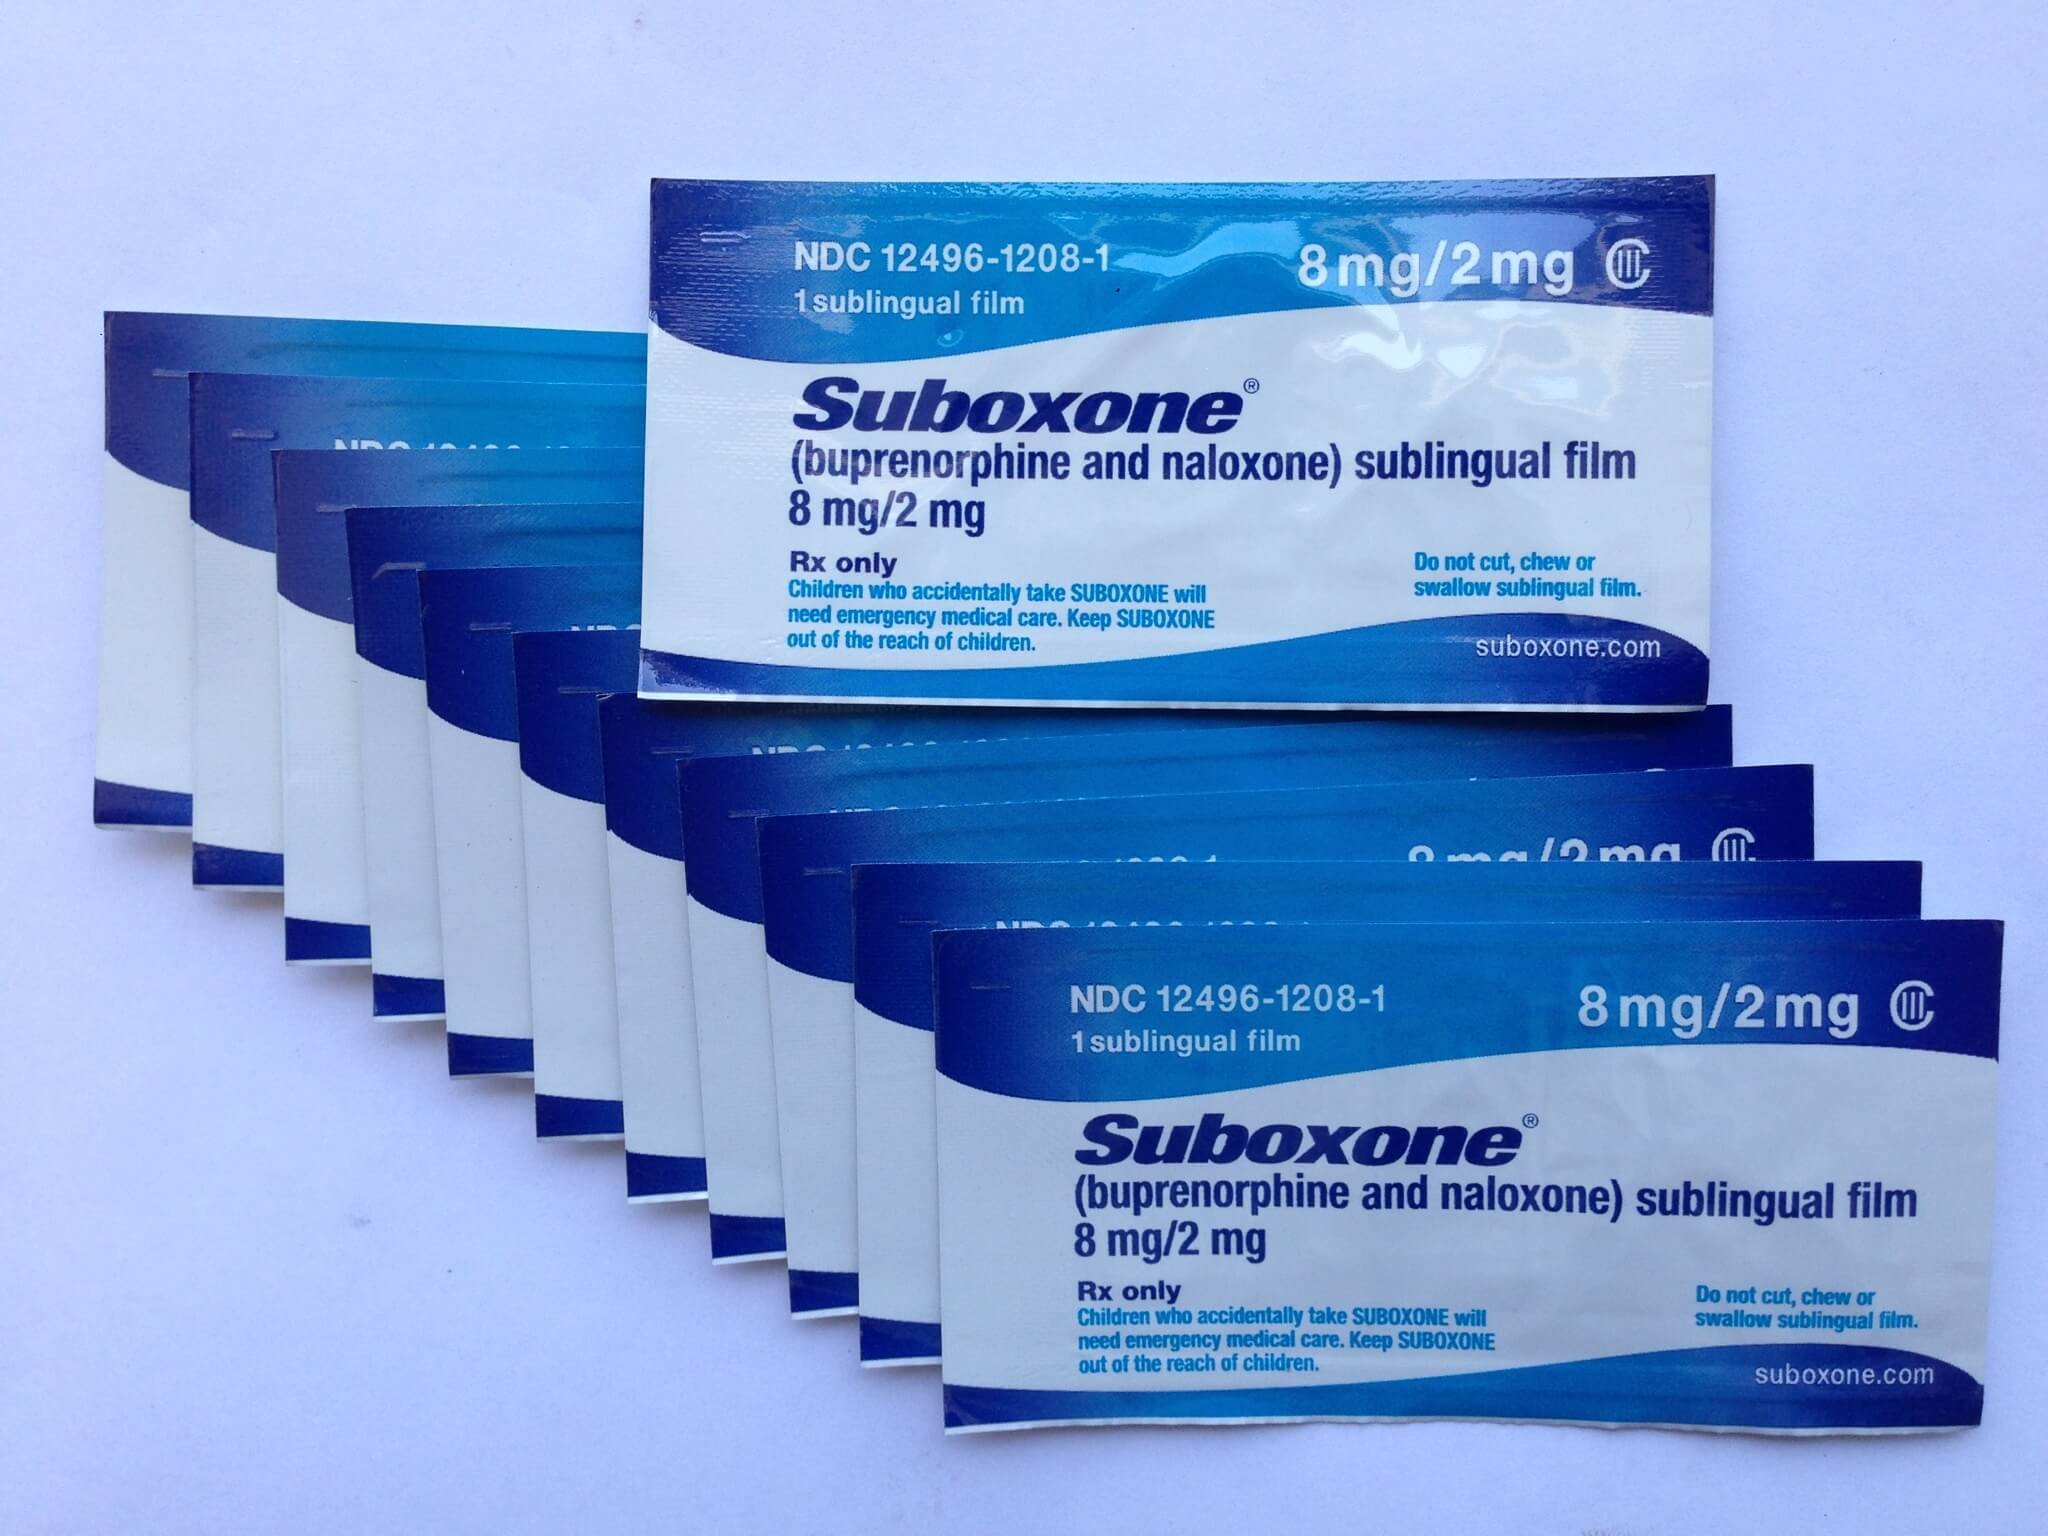 Finding Suboxone Coupons Drug and Medicine Blog